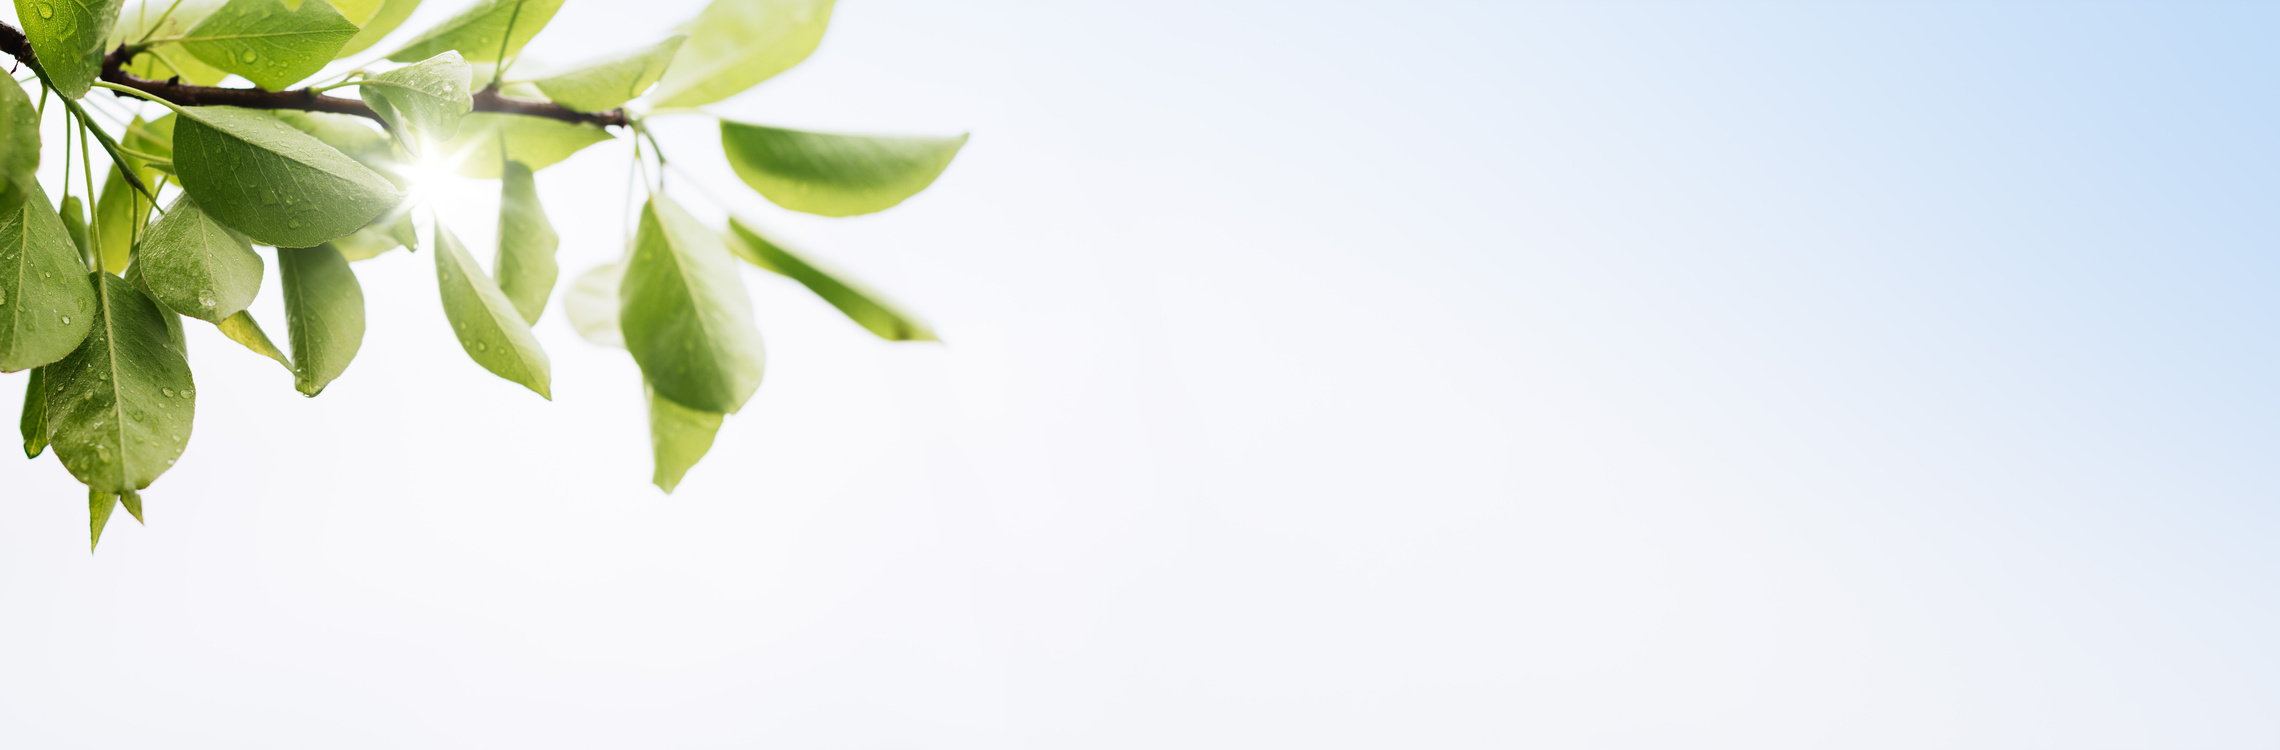 Spring Banner with Green Leaves on White Background